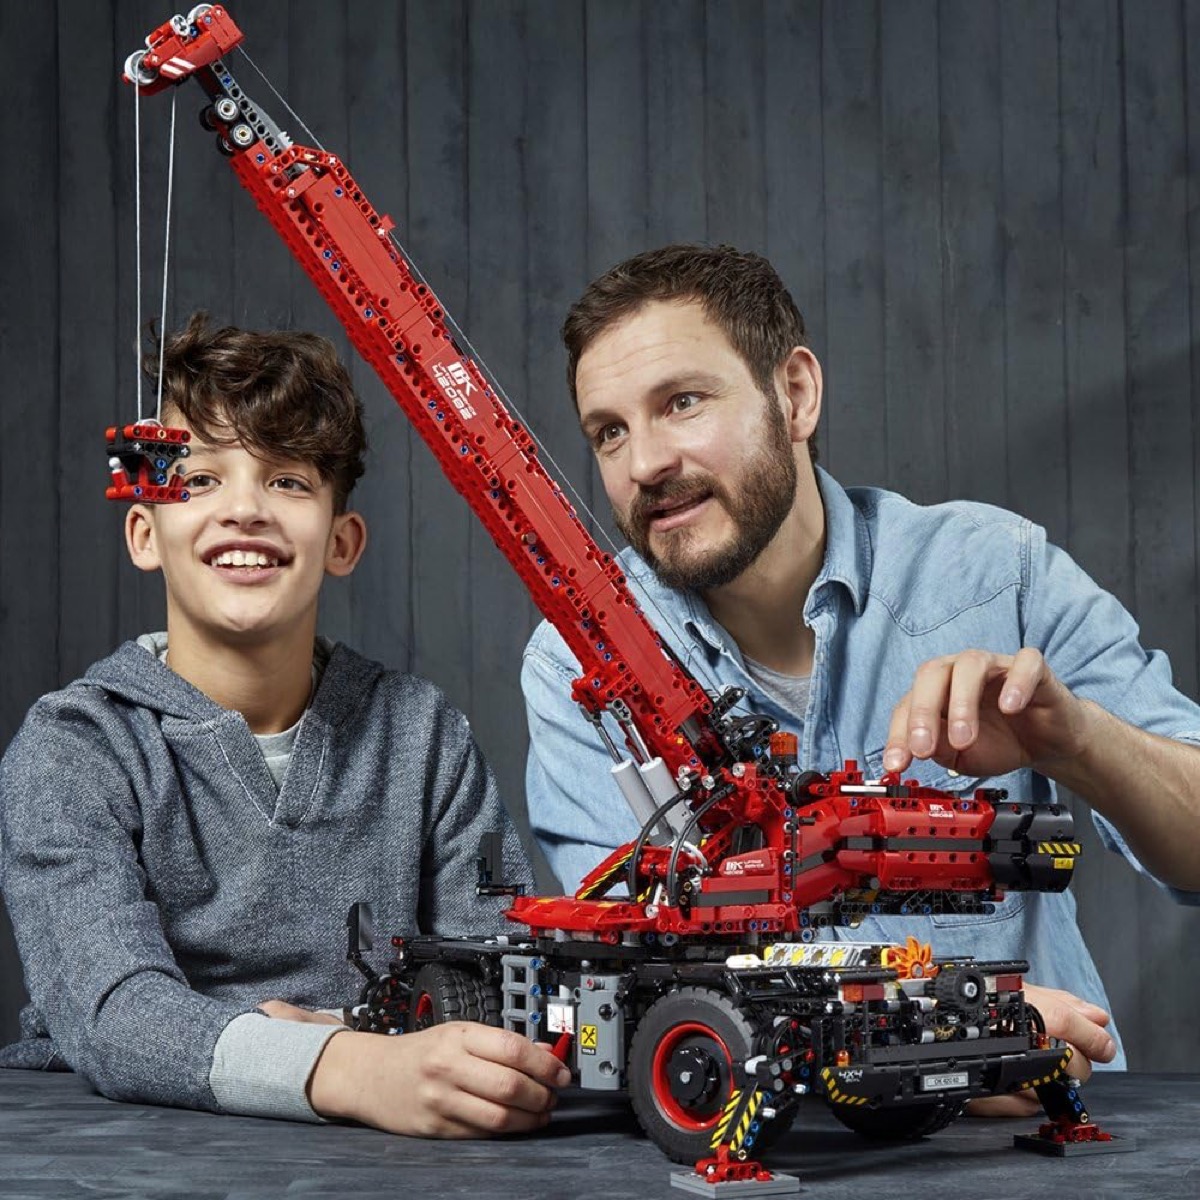 A father and son play with the The Rough Terrain Crane from LEGO